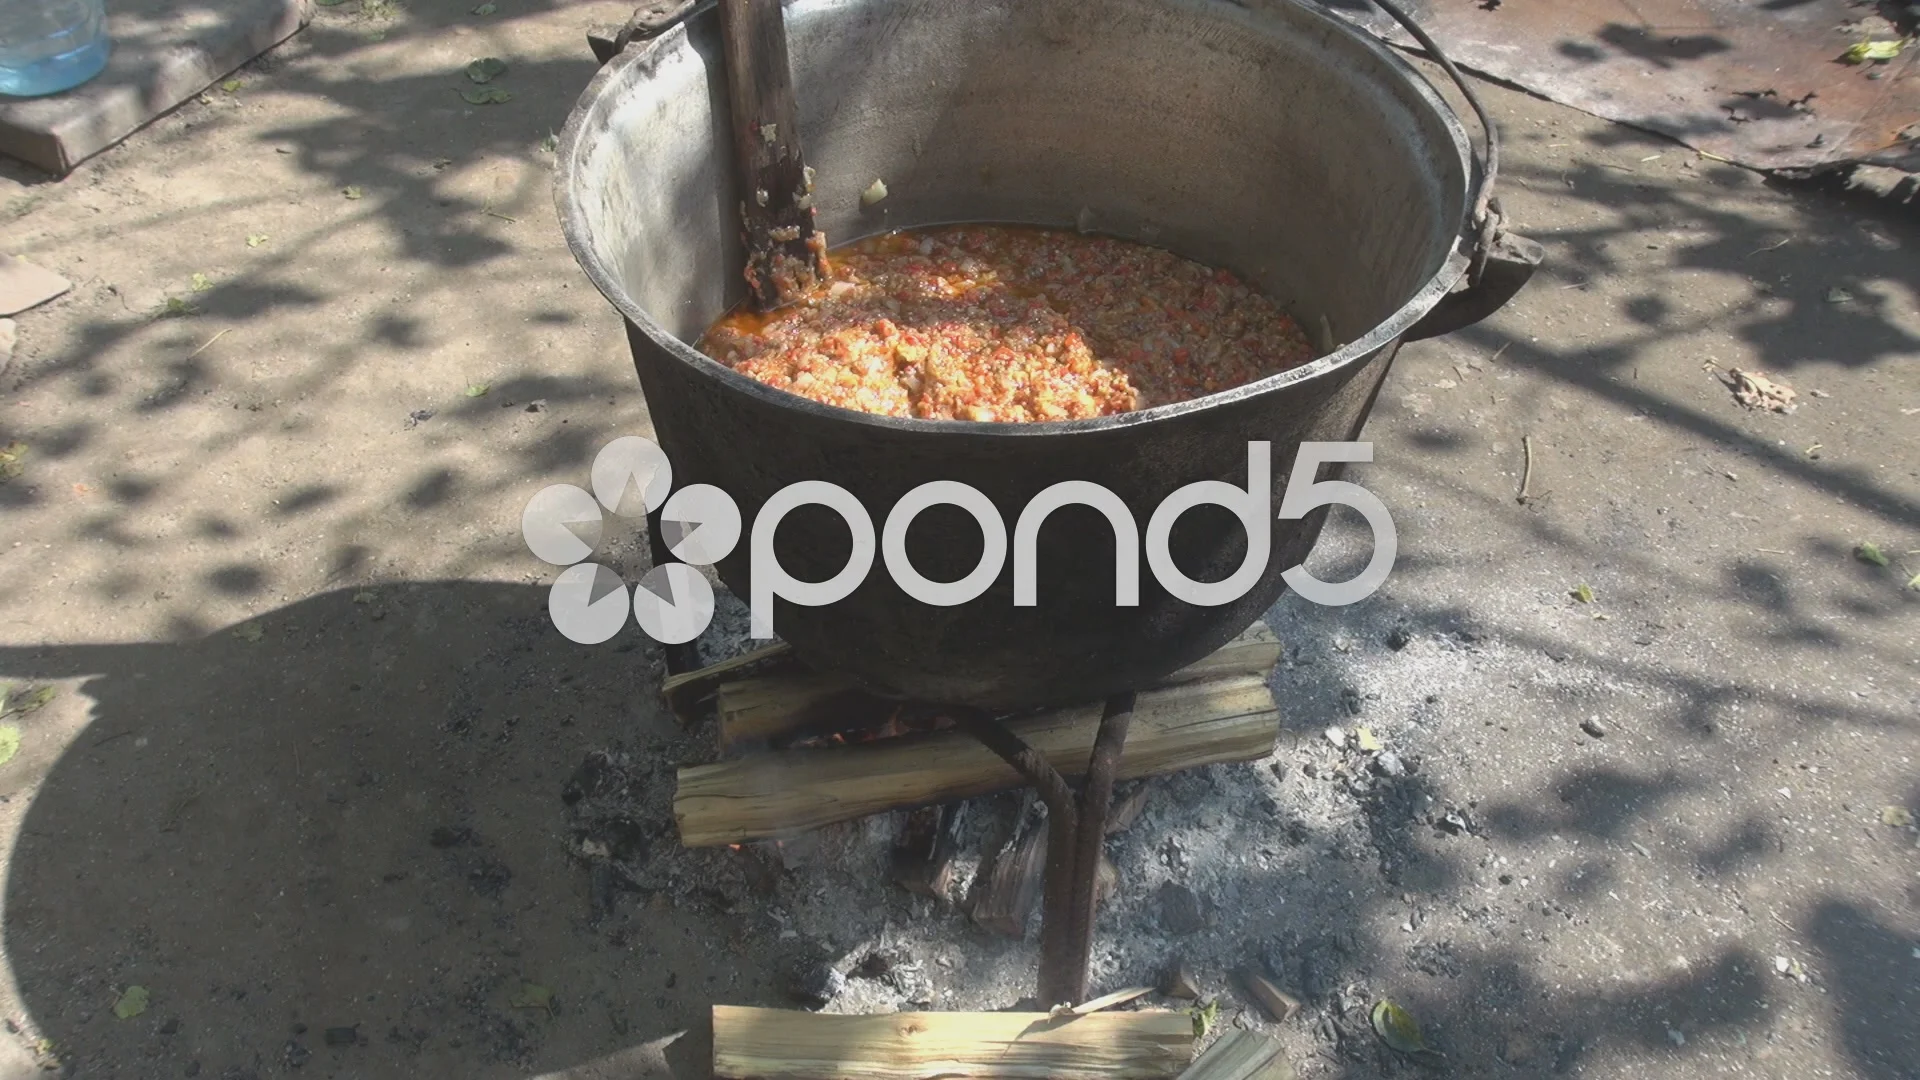 Traditional Cuisine Big Black Pot Cooking Food, Natural Fire With